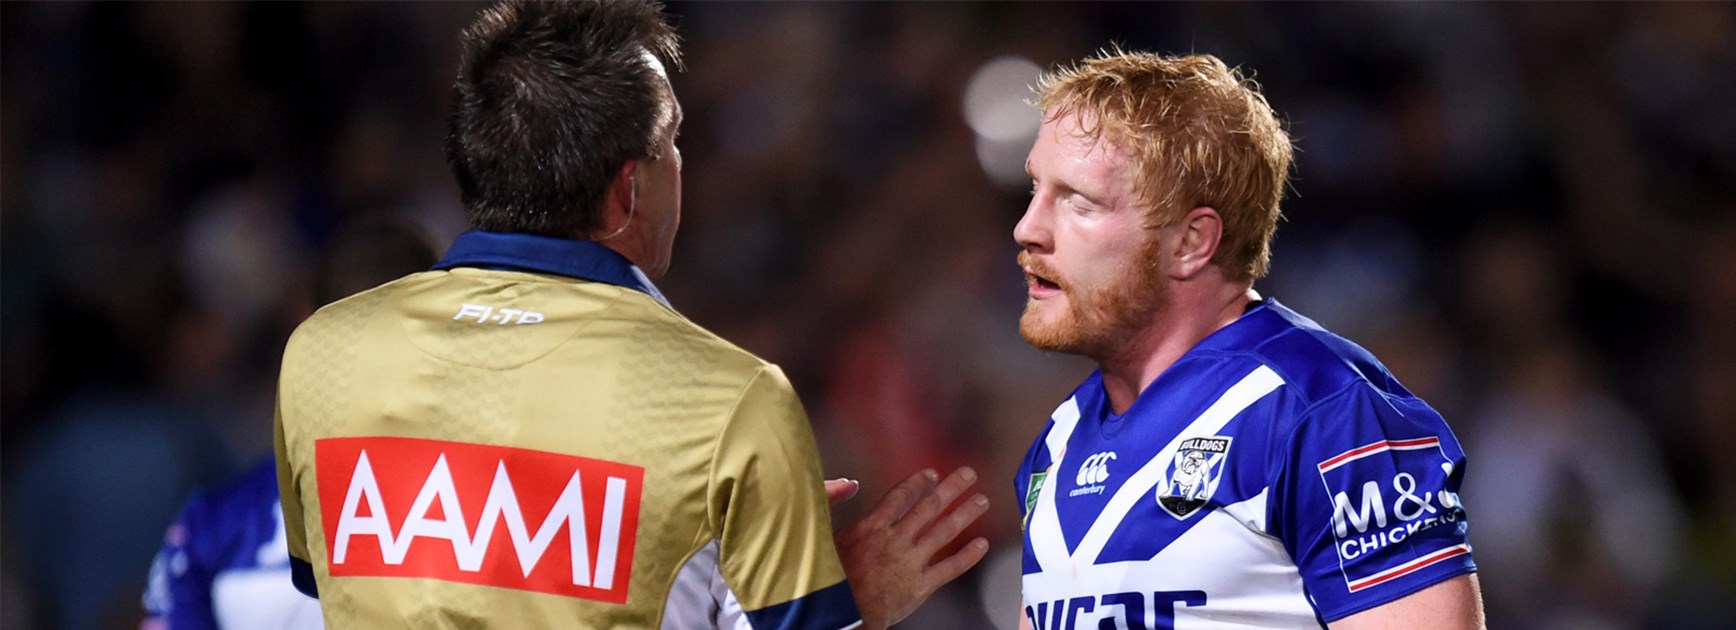 Bulldogs skipper talks with Jared Maxwell during Thursday night's clash with the Cowboys.